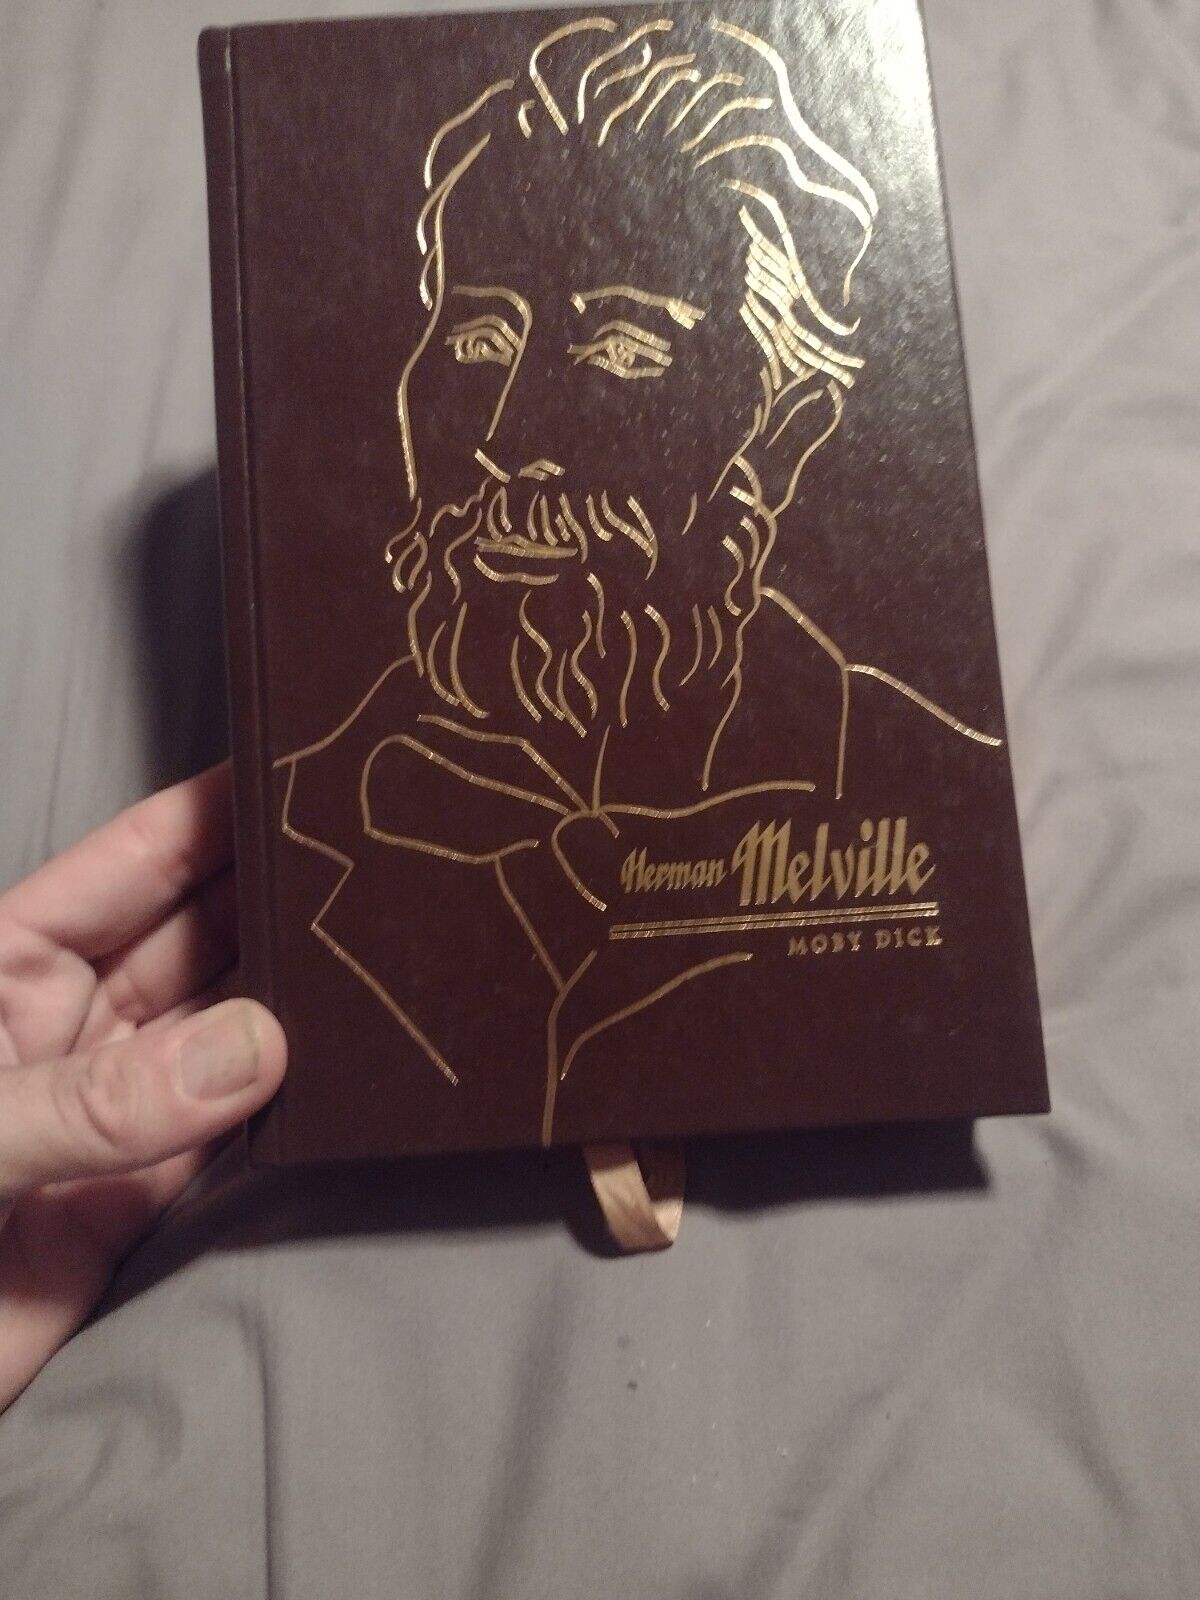 Herman Melville Moby Dick 1998 Gold Gilted Leather HC Book Special Edition 😍